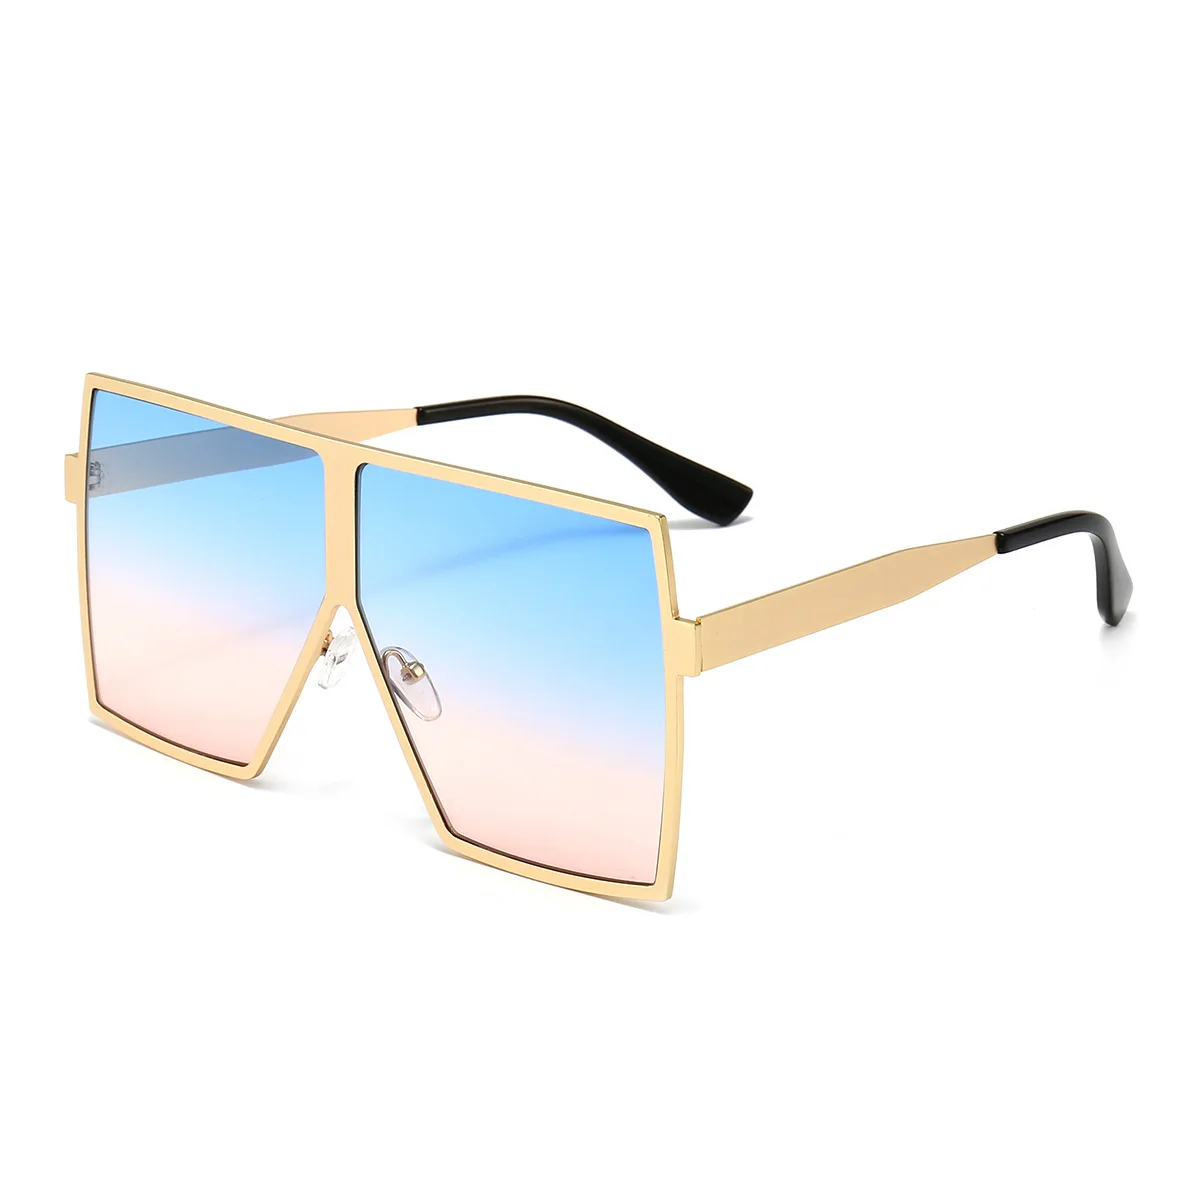 

MJ-0399 The New European And American Fashion Dazzle Colour Character Metal Frame Square Frame Sunglasses Unisex